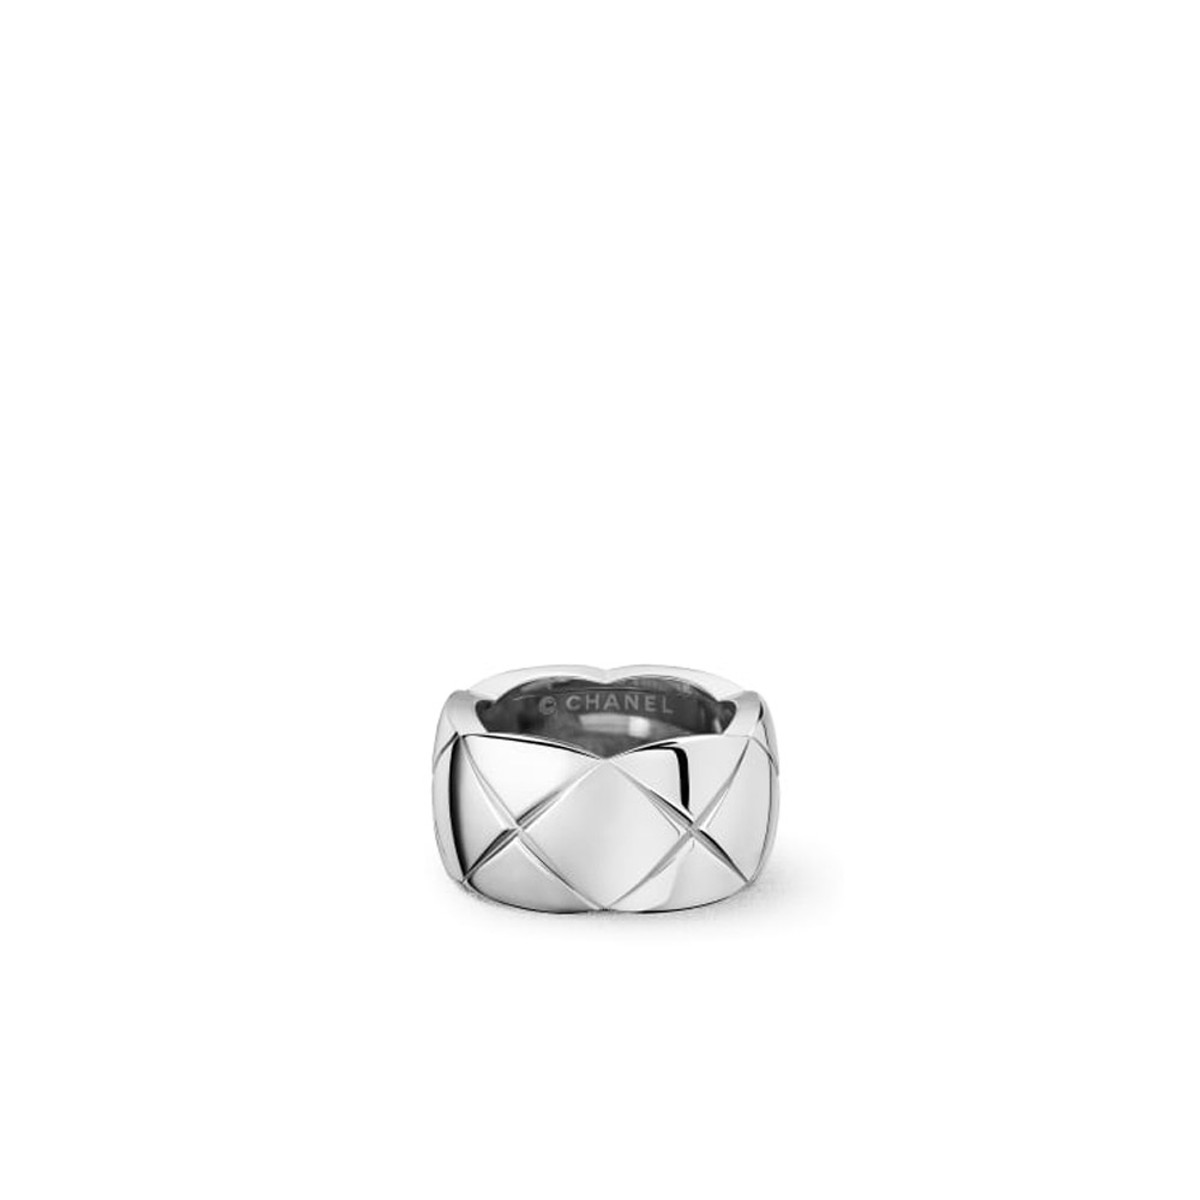 CHANEL COCO CRUSH RING-25963 Product Image